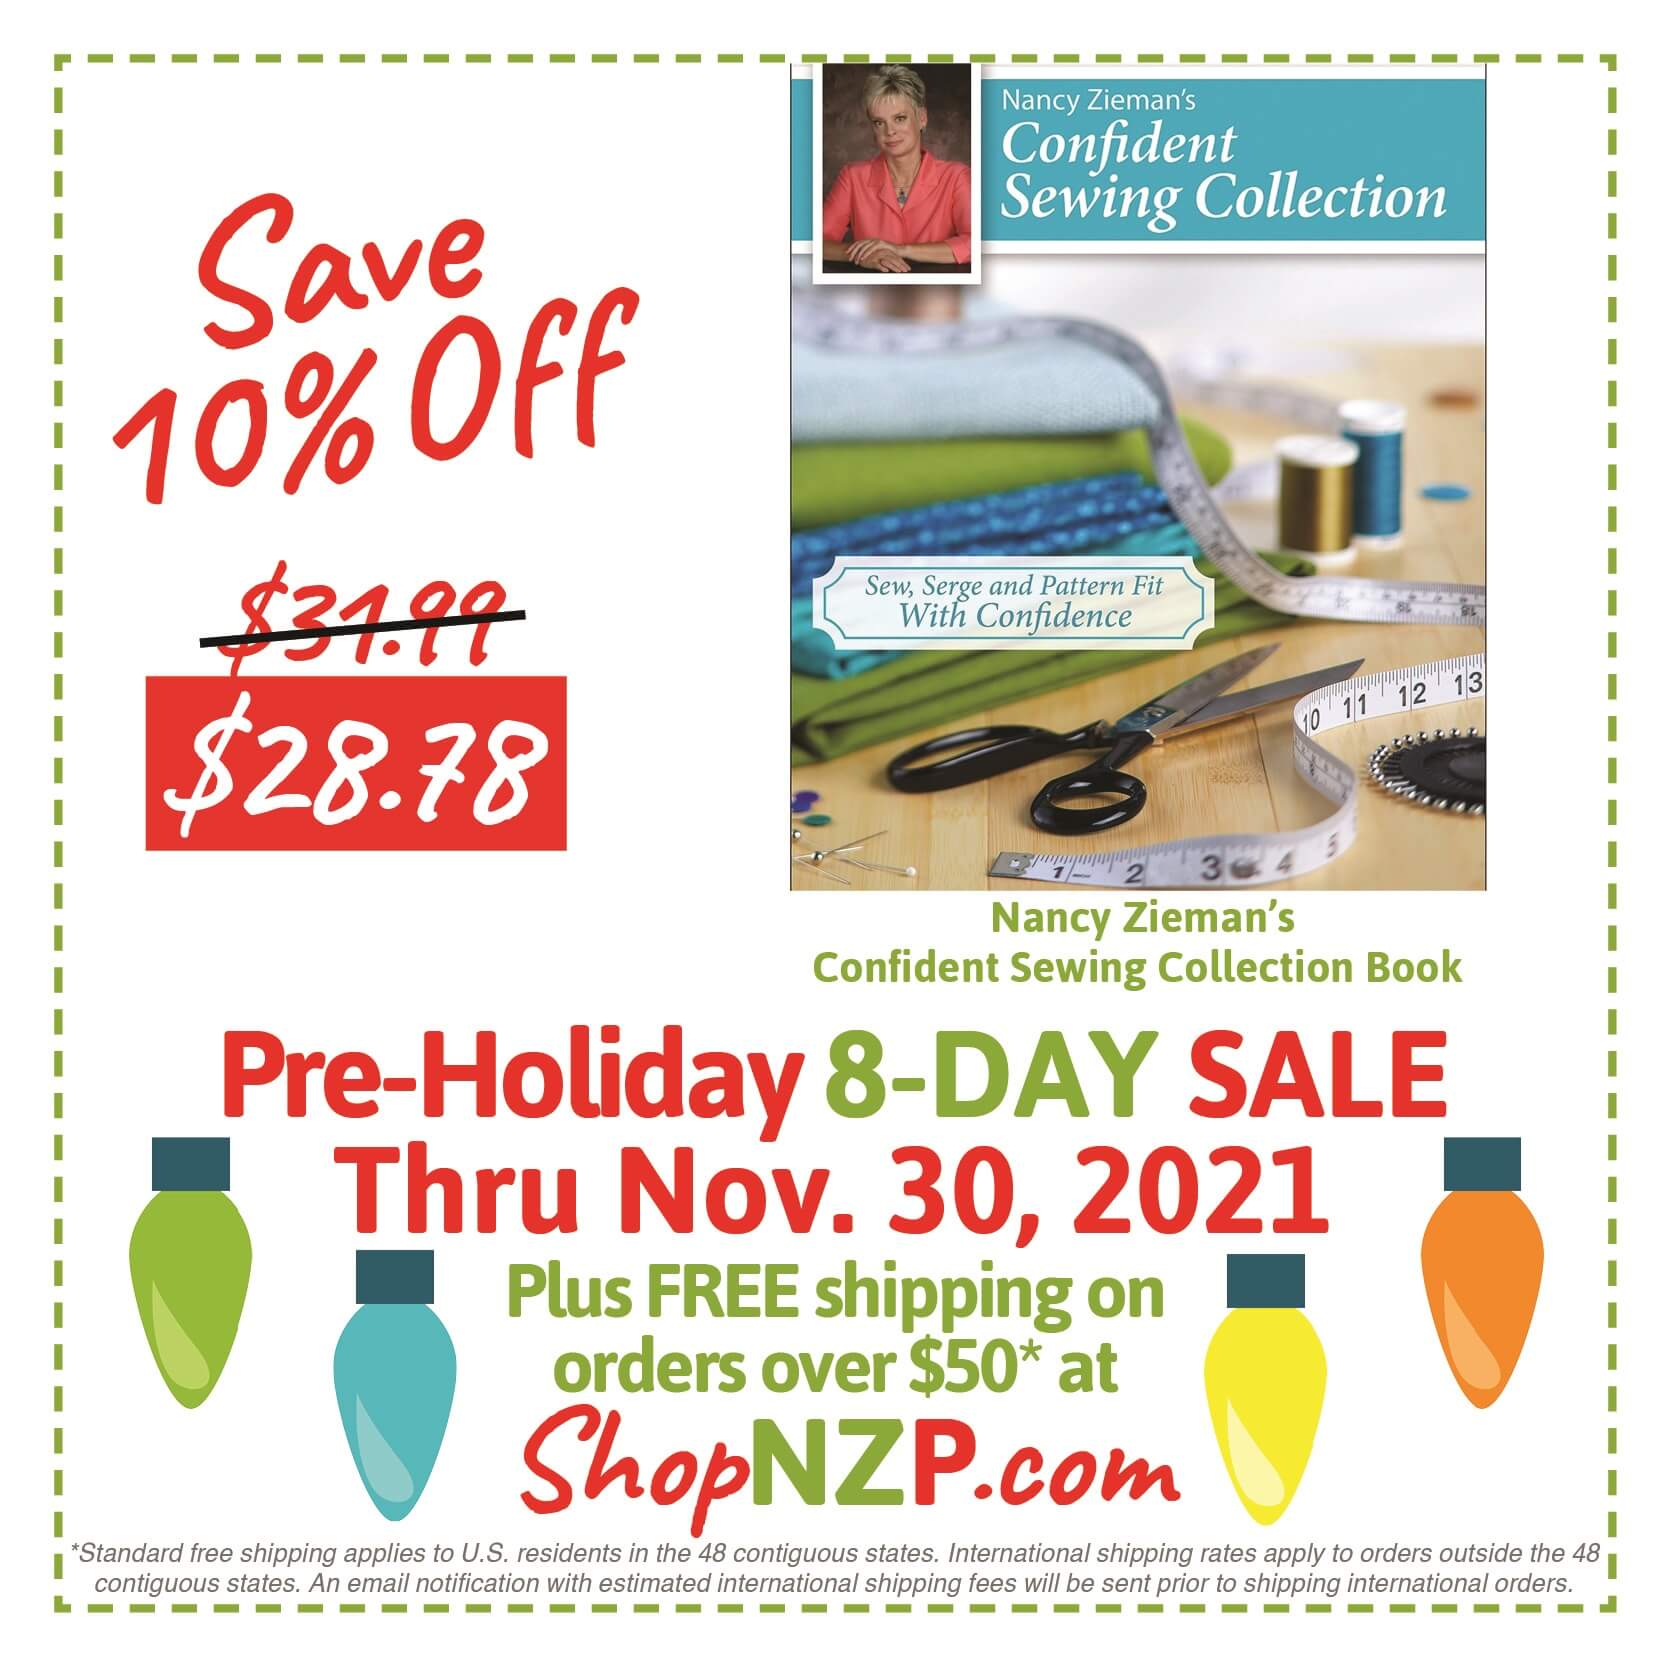 Save 10 Percent Off Confident Sewing Collection Book by Nancy Zieman at Nancy Zieman Productions at ShopNZP.com Sale Nov 23-30, 21